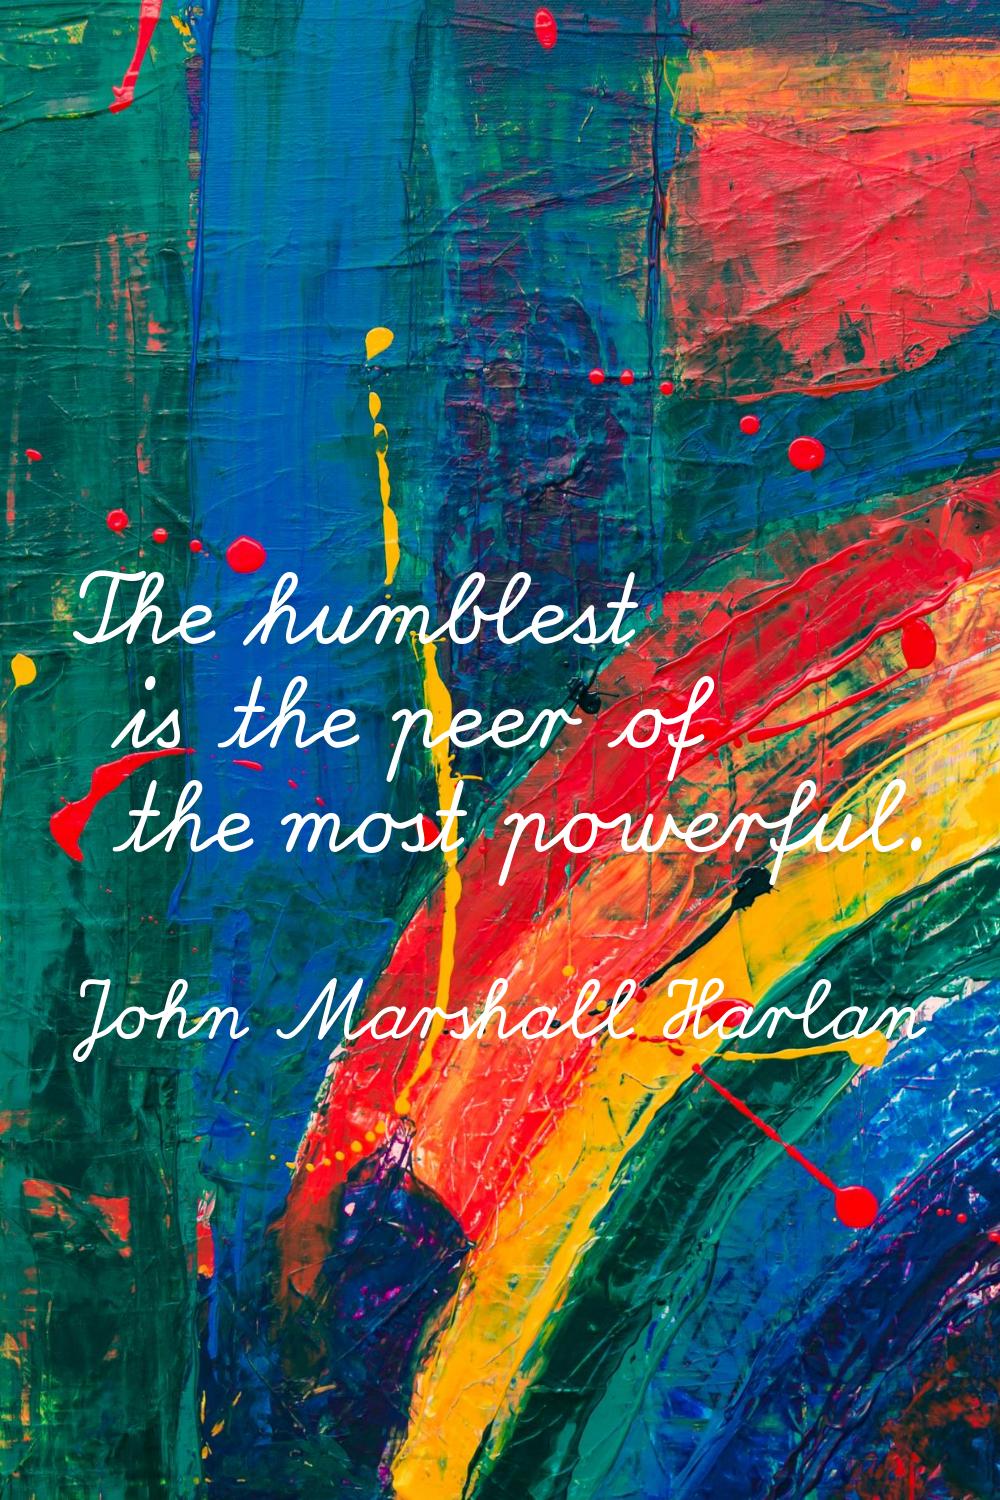 The humblest is the peer of the most powerful.